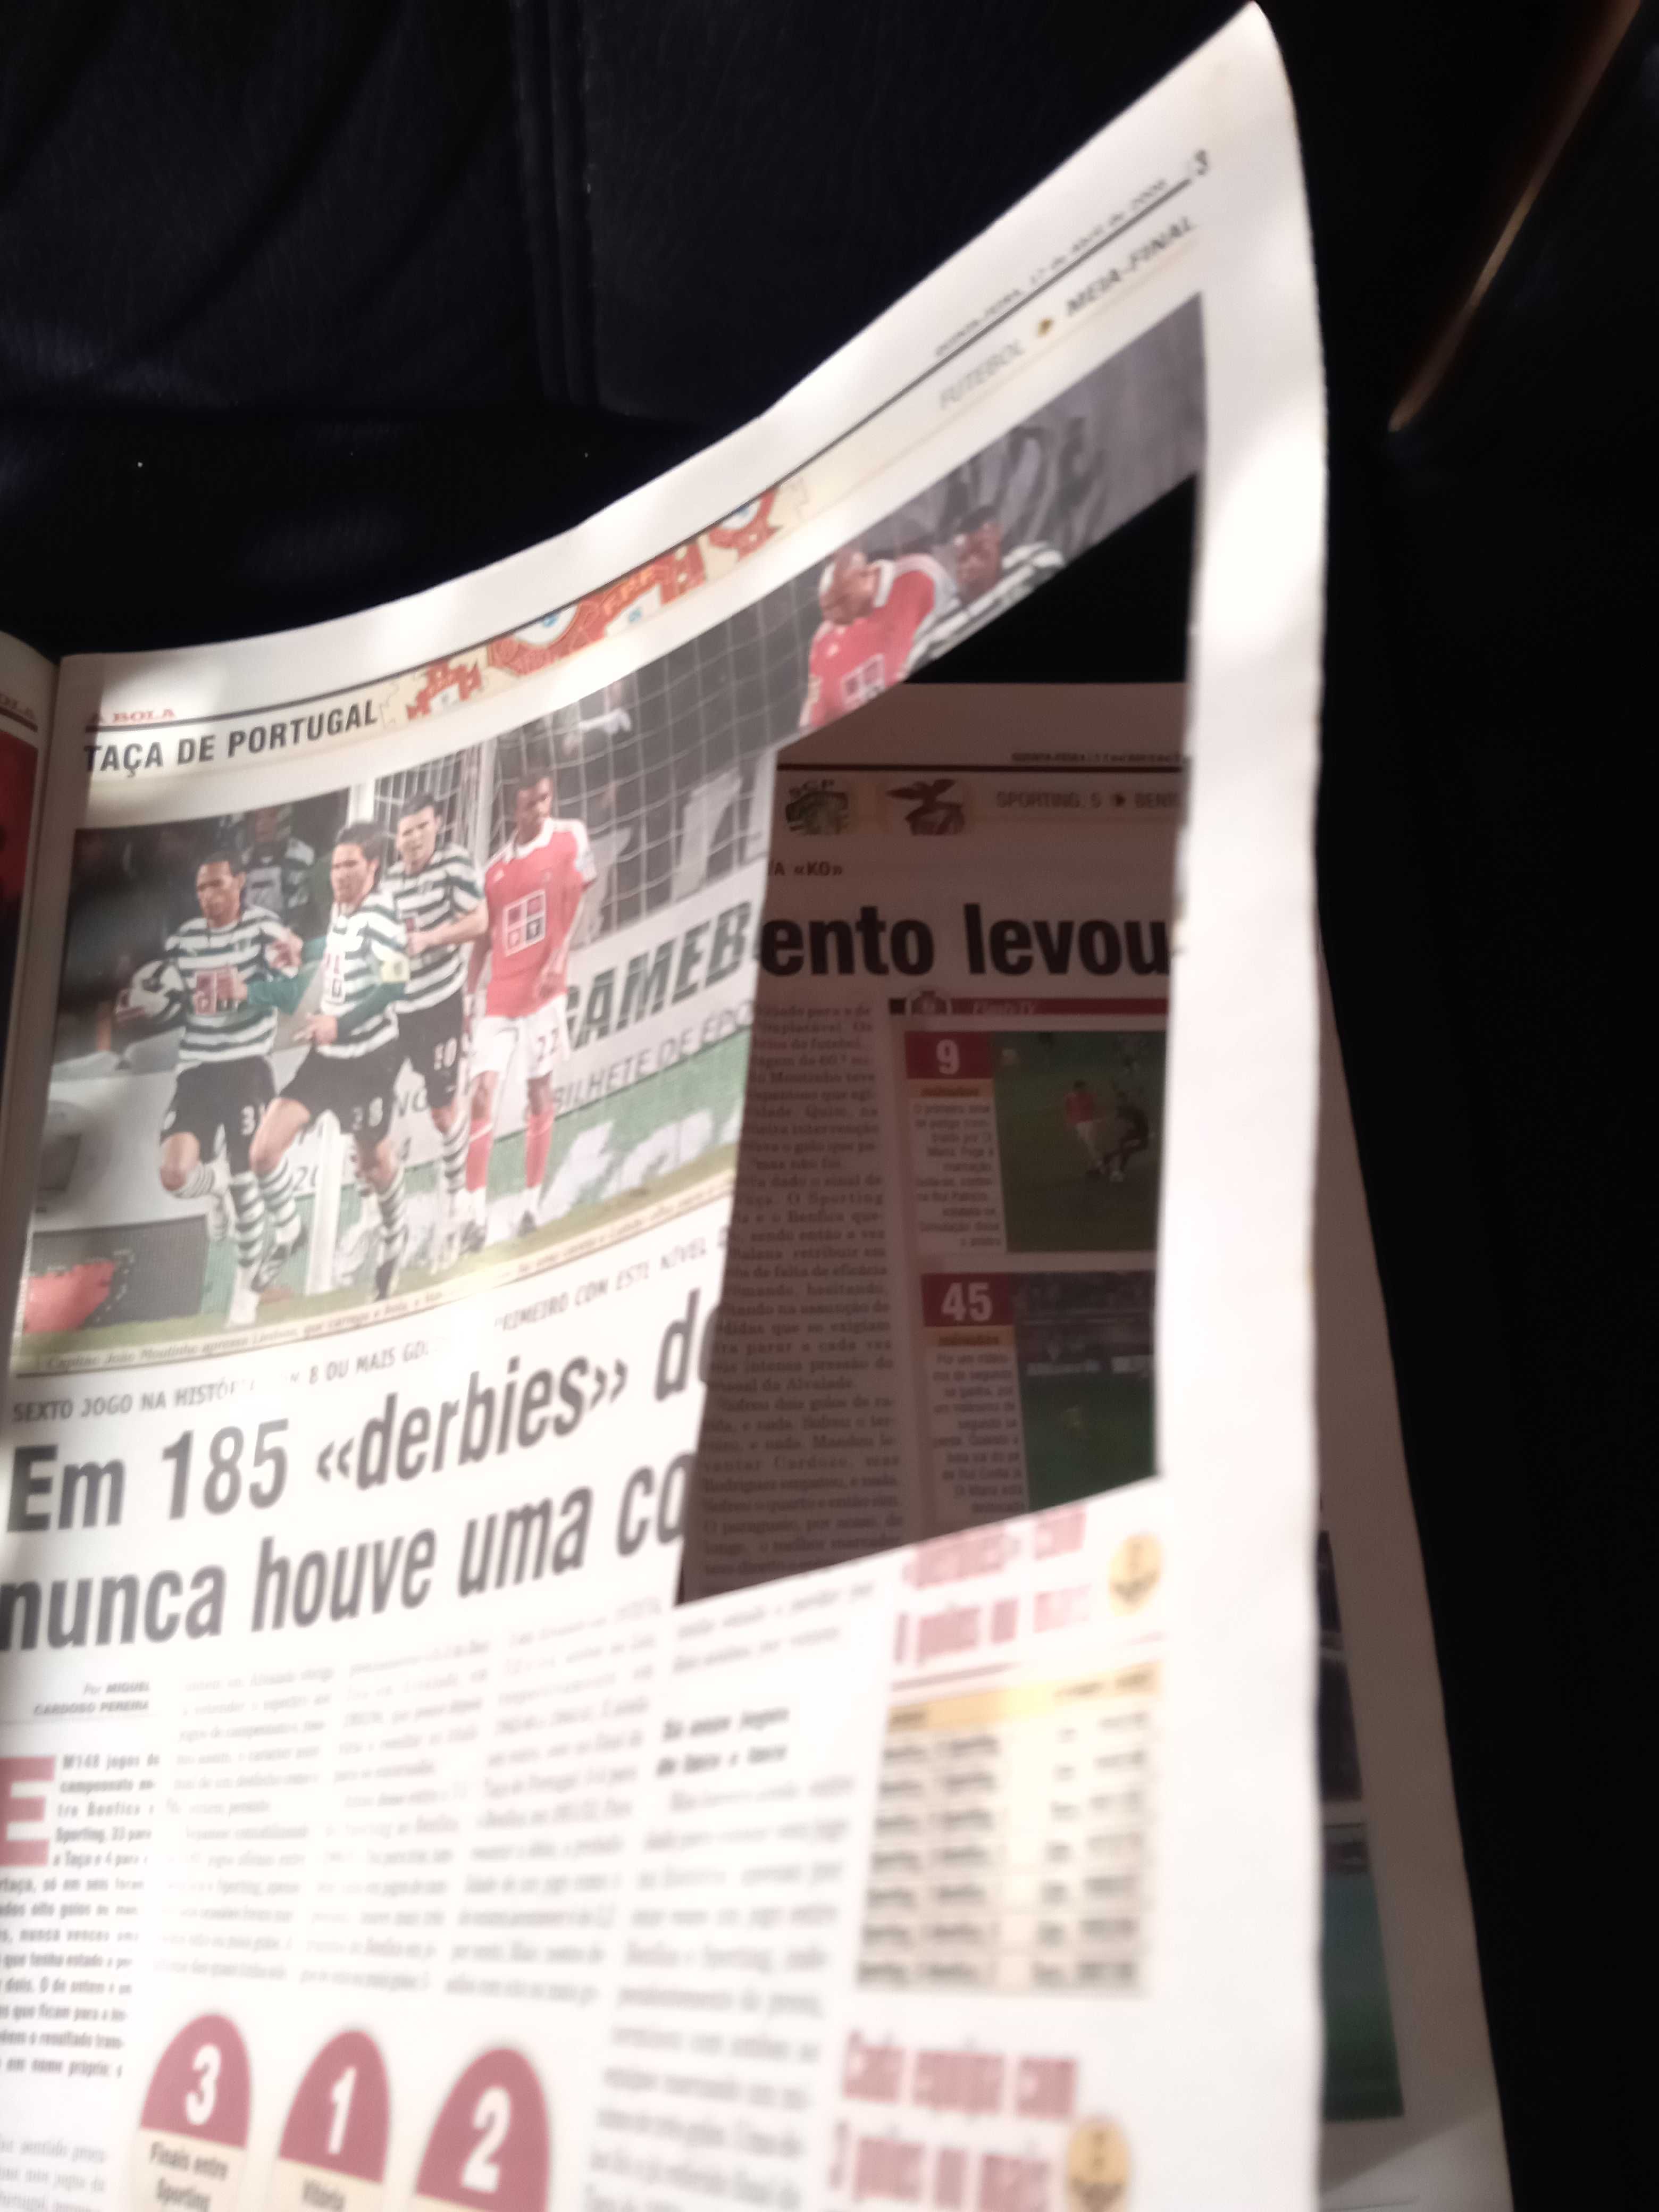 Jornal a Bola Sporting 5 Benfica 3